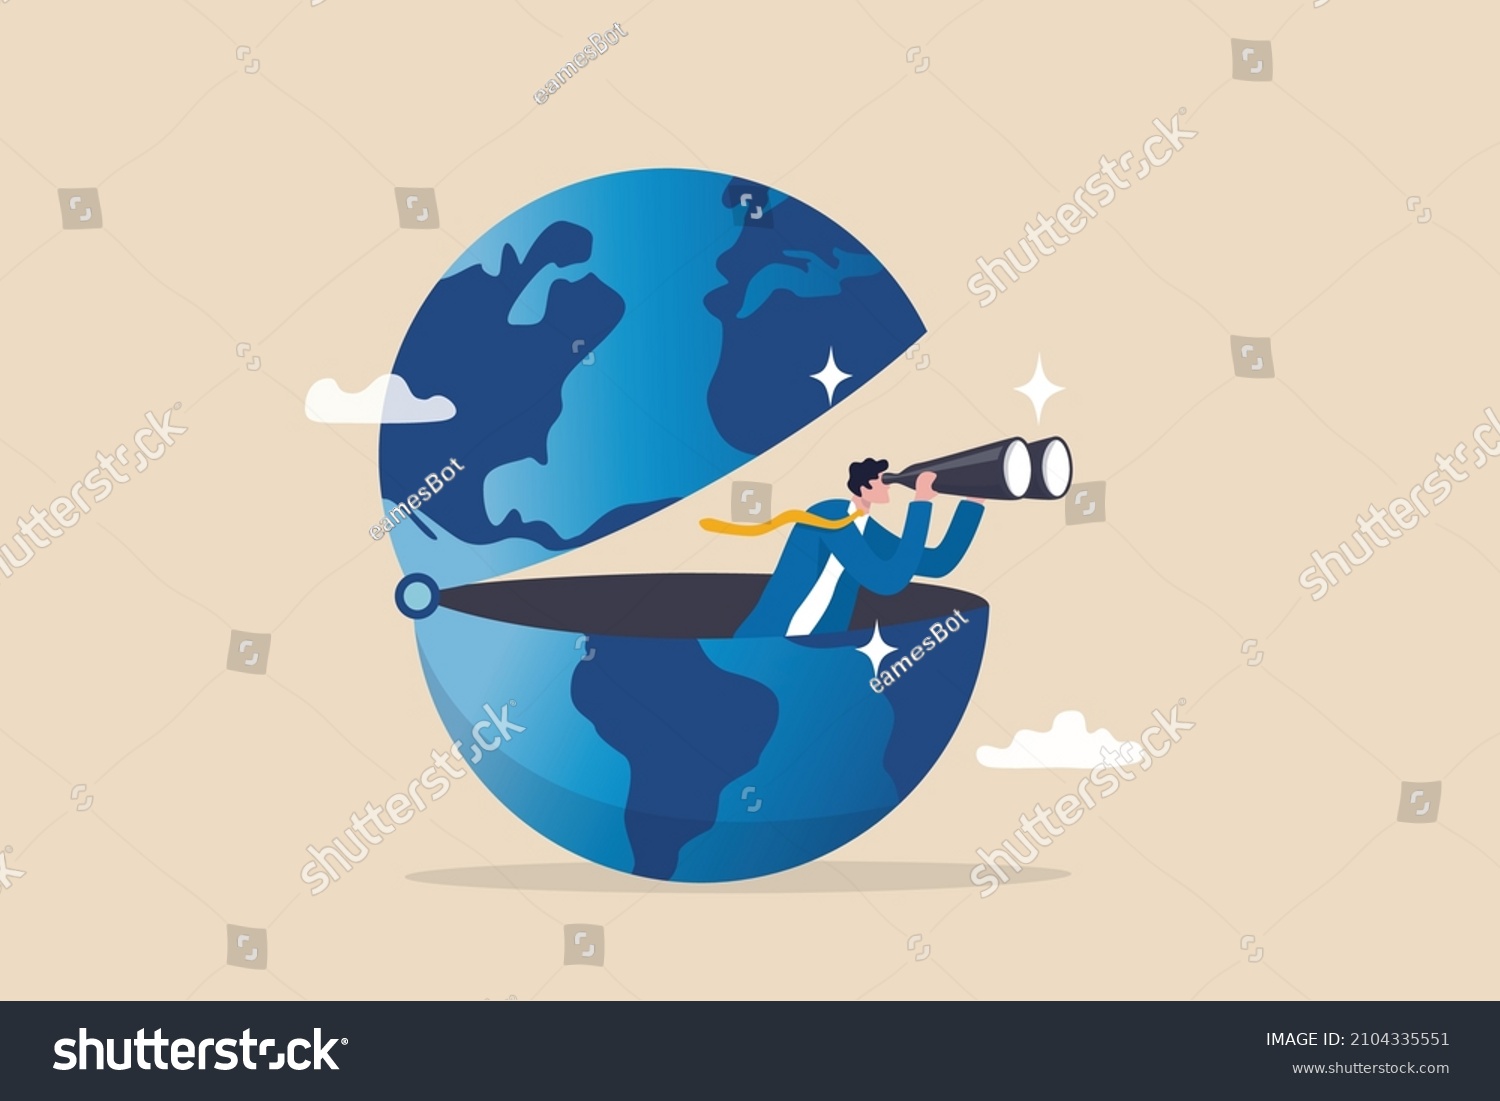 SVG of World economic vision or international opportunity for business, work or investment, searching for oversea business concept, smart businessman open globe using binoculars looking for future vision. svg